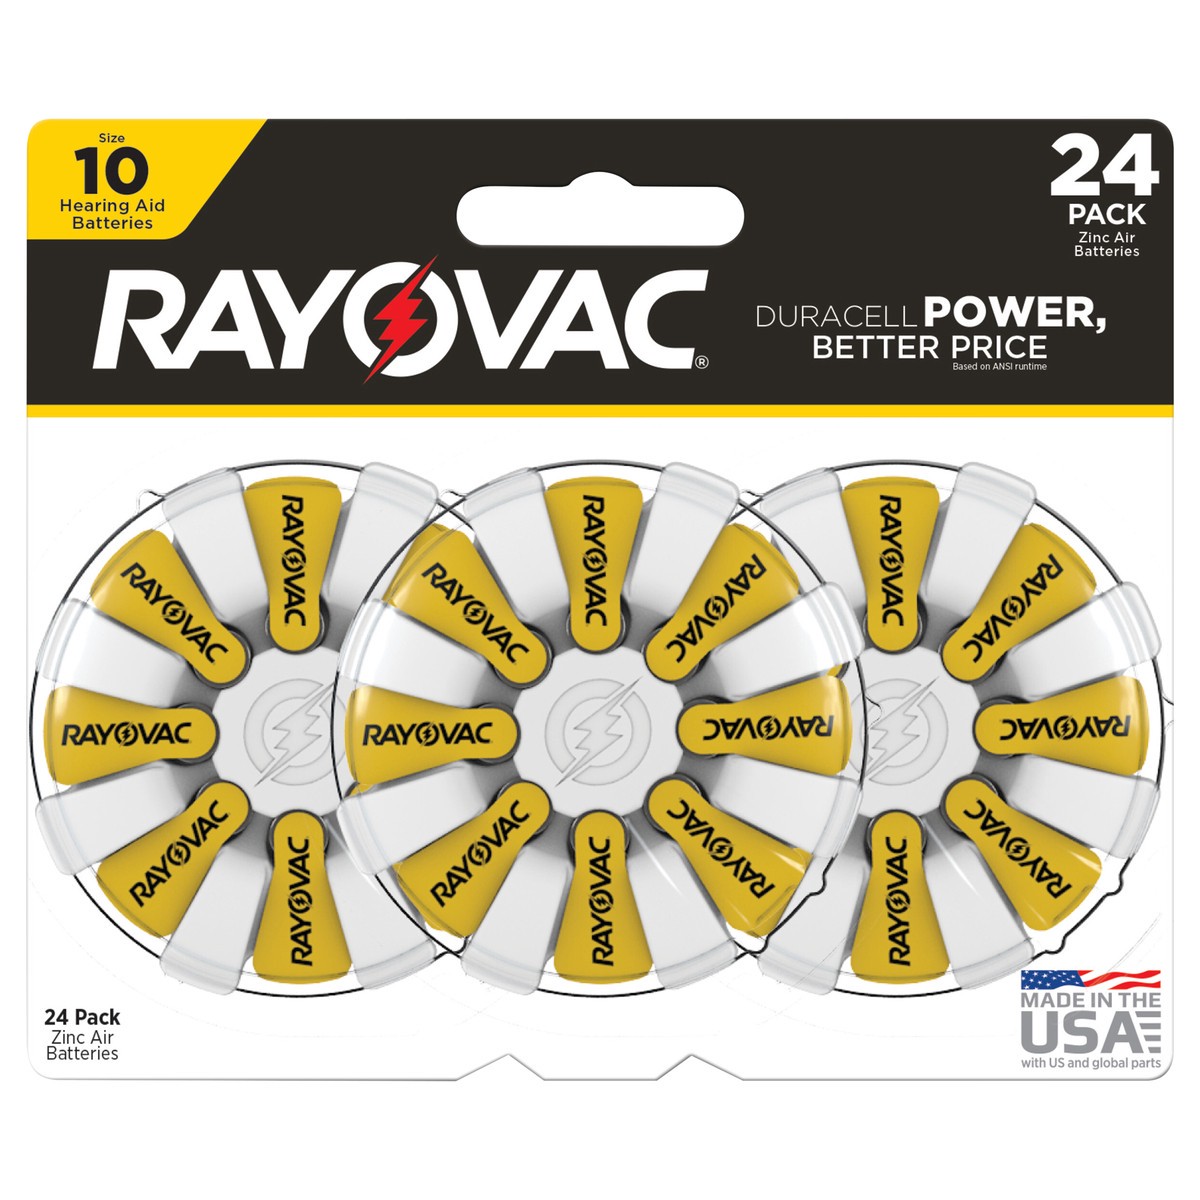 slide 1 of 37, Rayovac Size 10 Hearing Aid Batteries (24 Pack), 24 ct